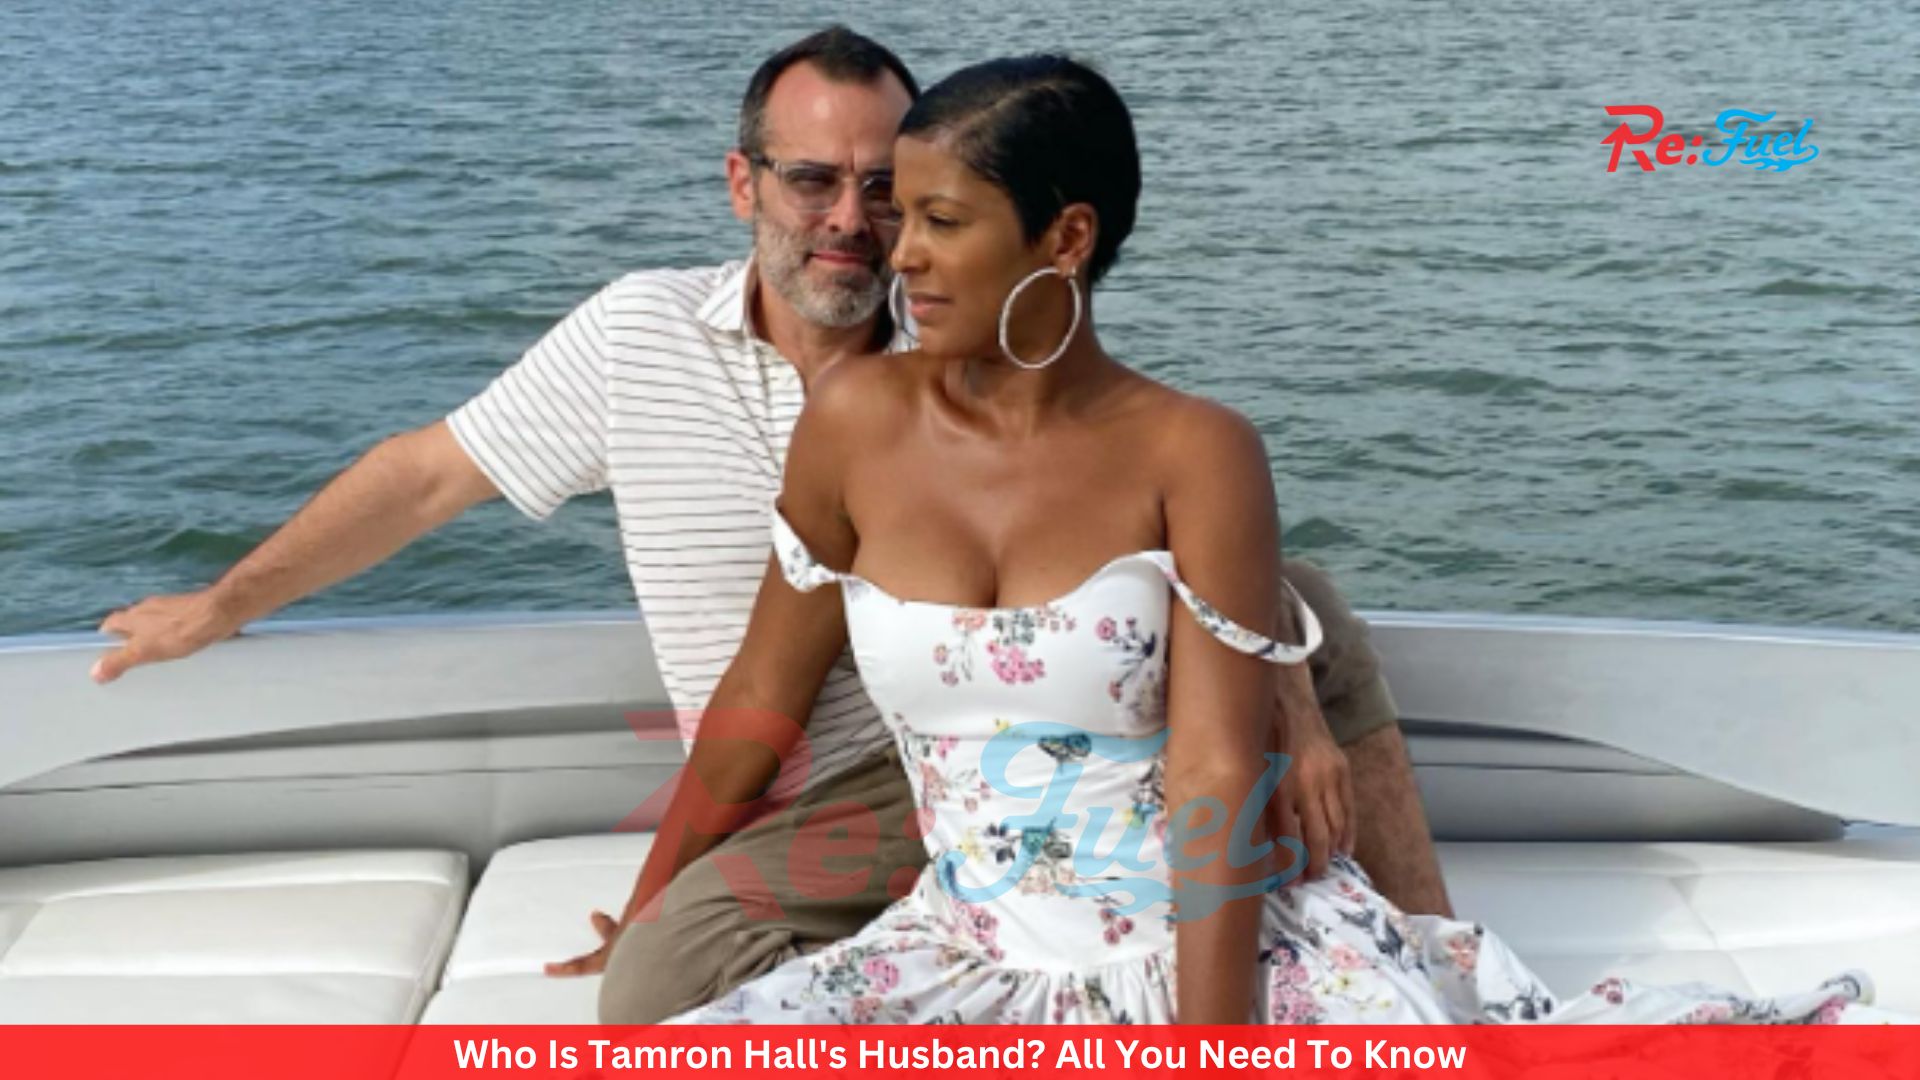 Who Is Tamron Hall's Husband? All You Need To Know